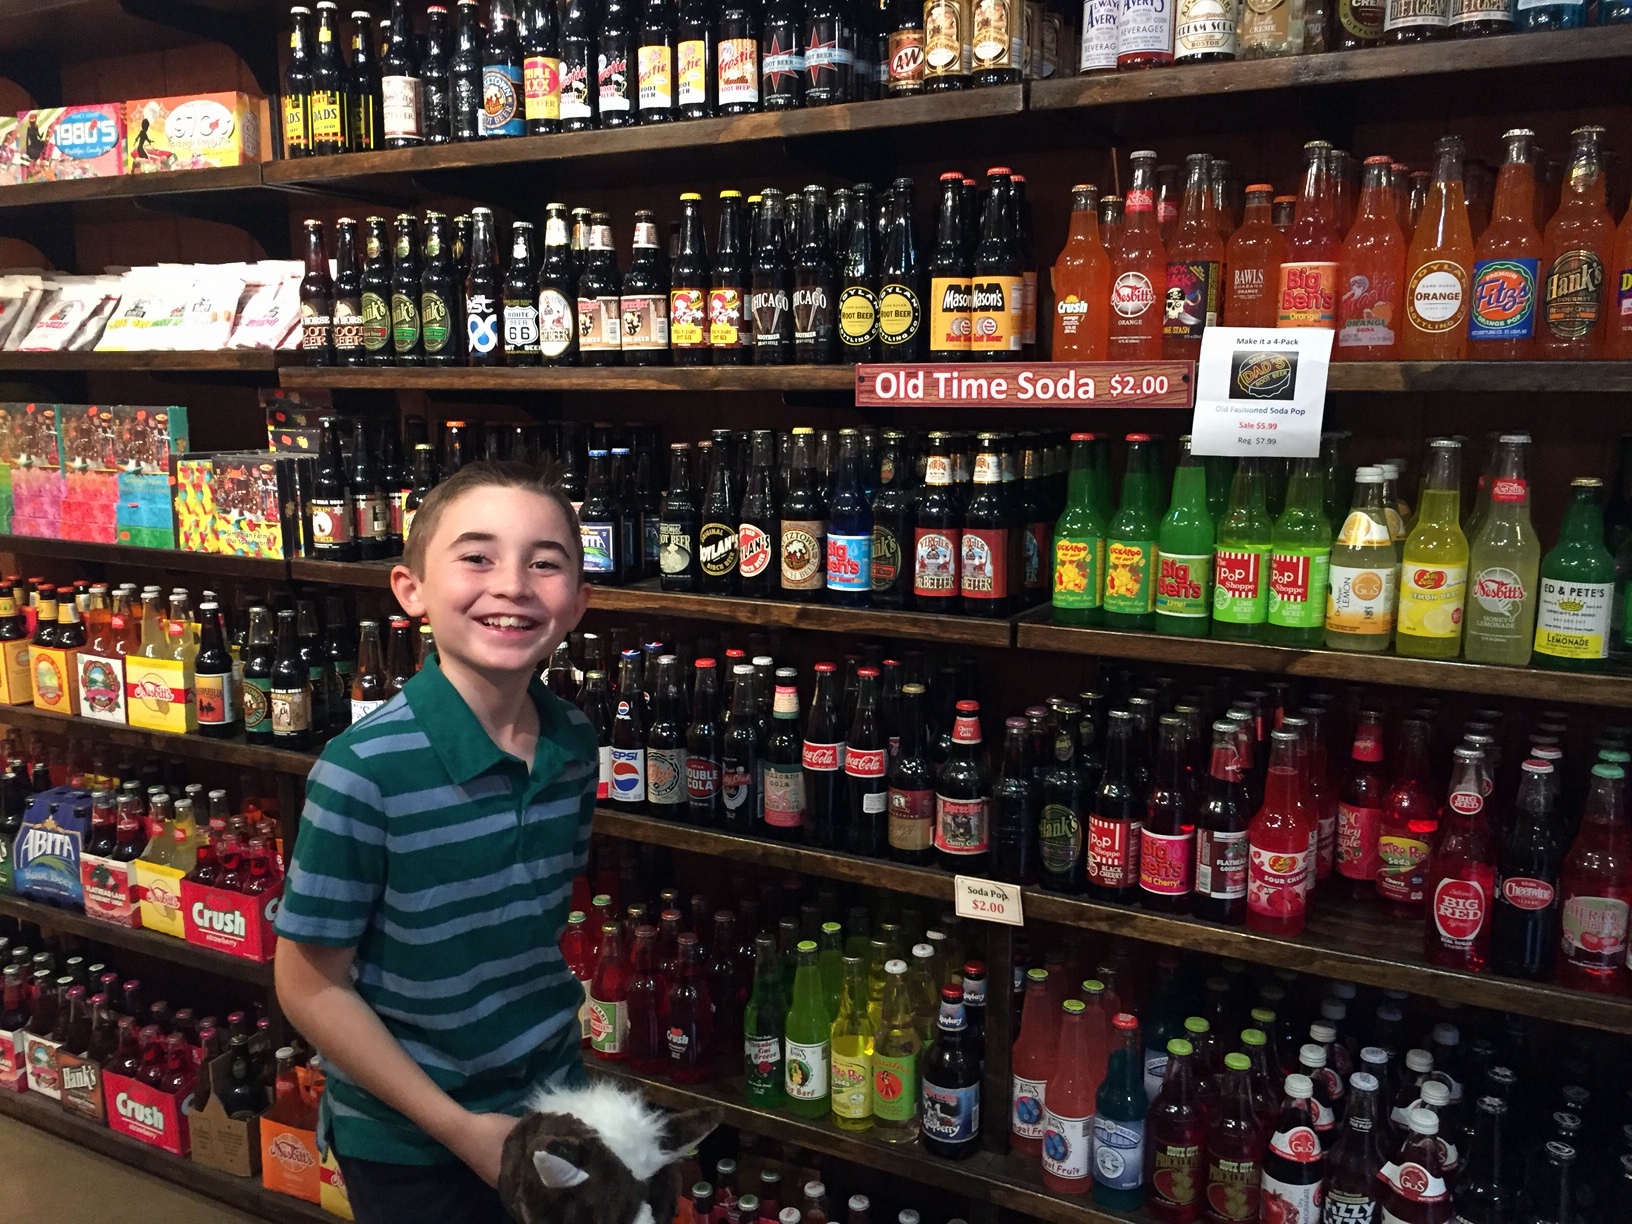 Hundreds of old-fashioned sodas to choose from